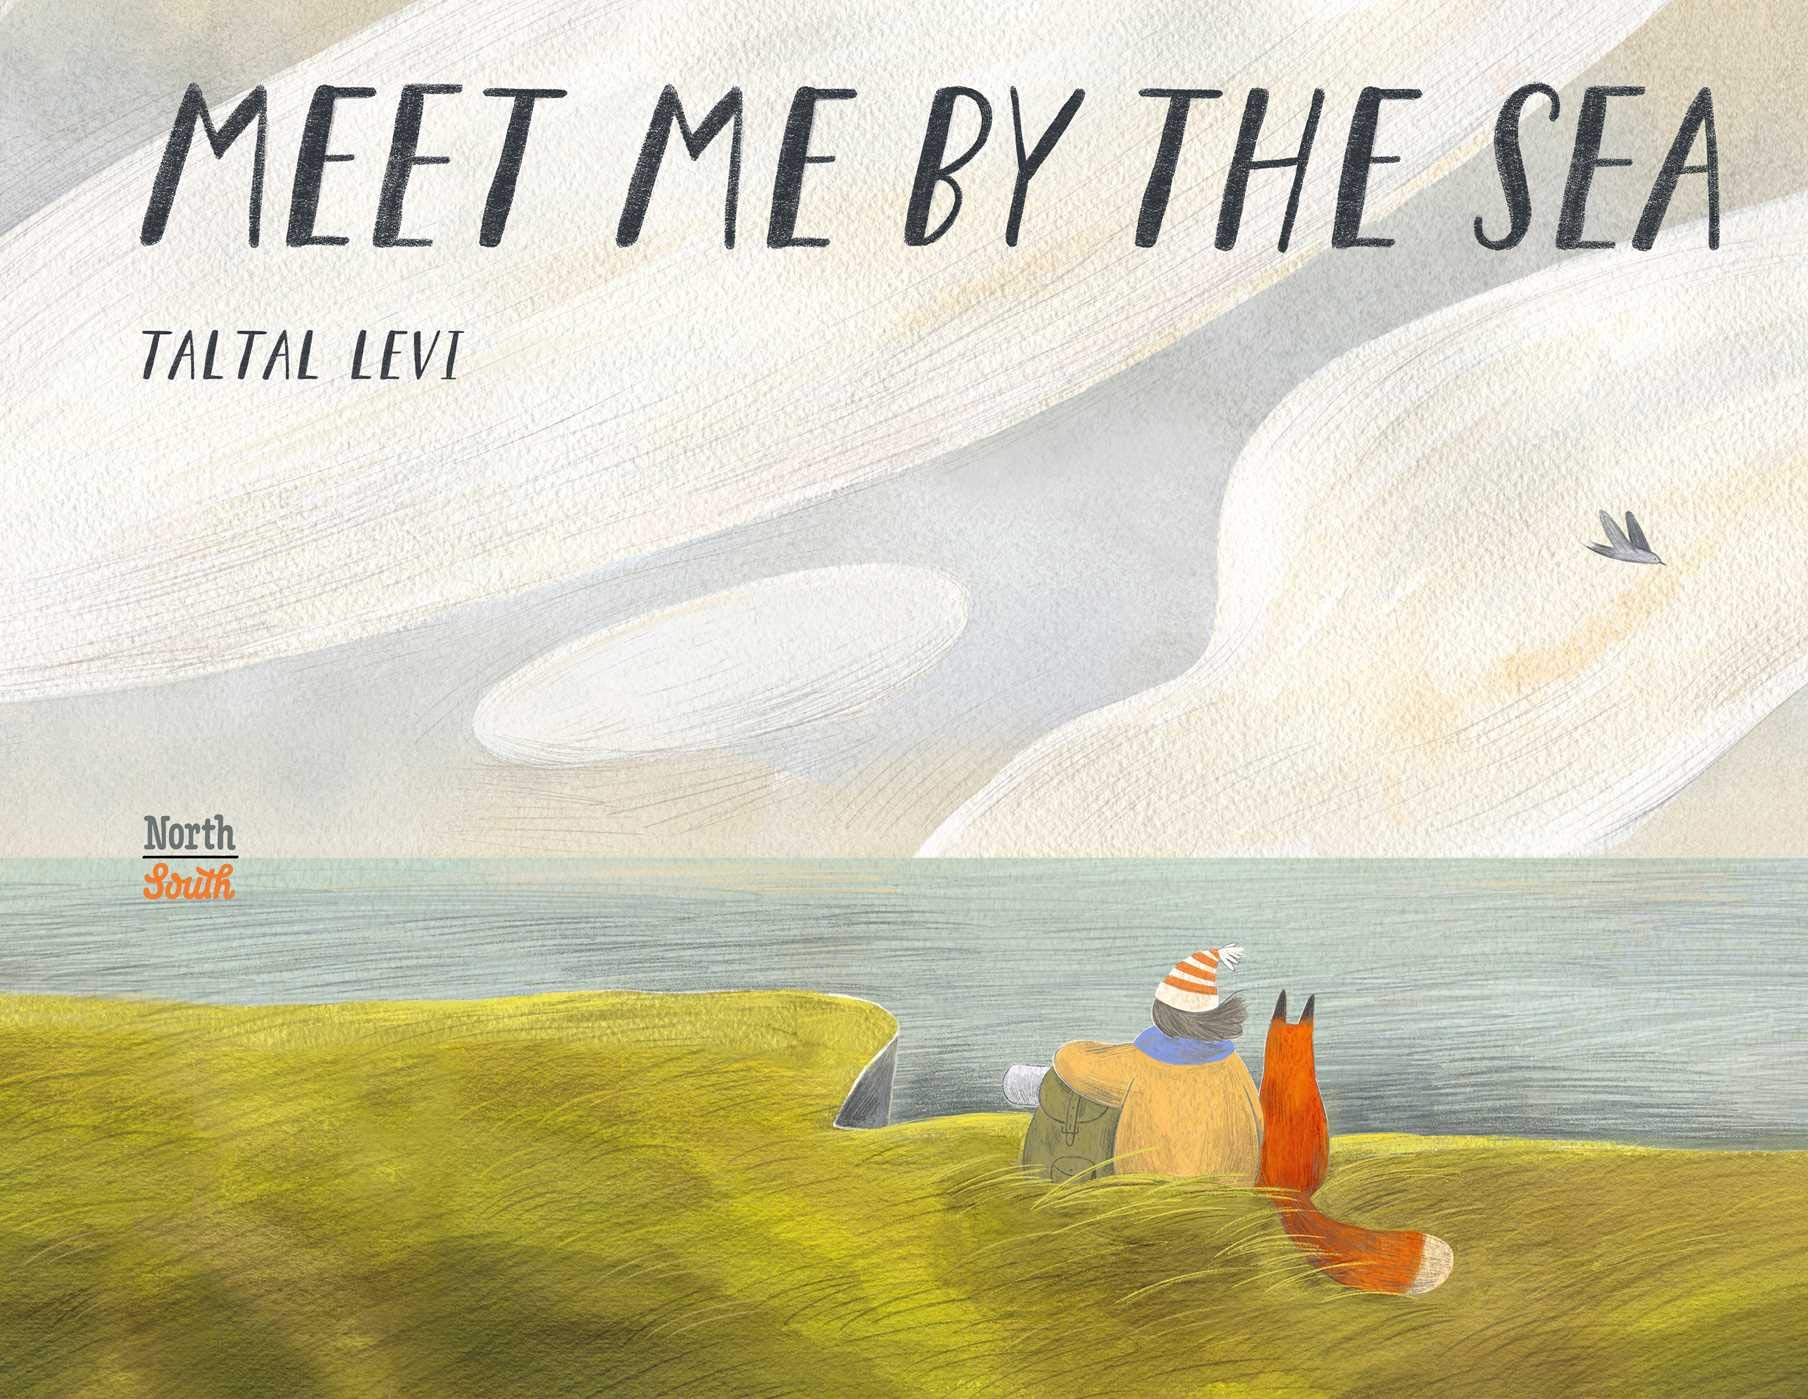 Meet Me By the Sea